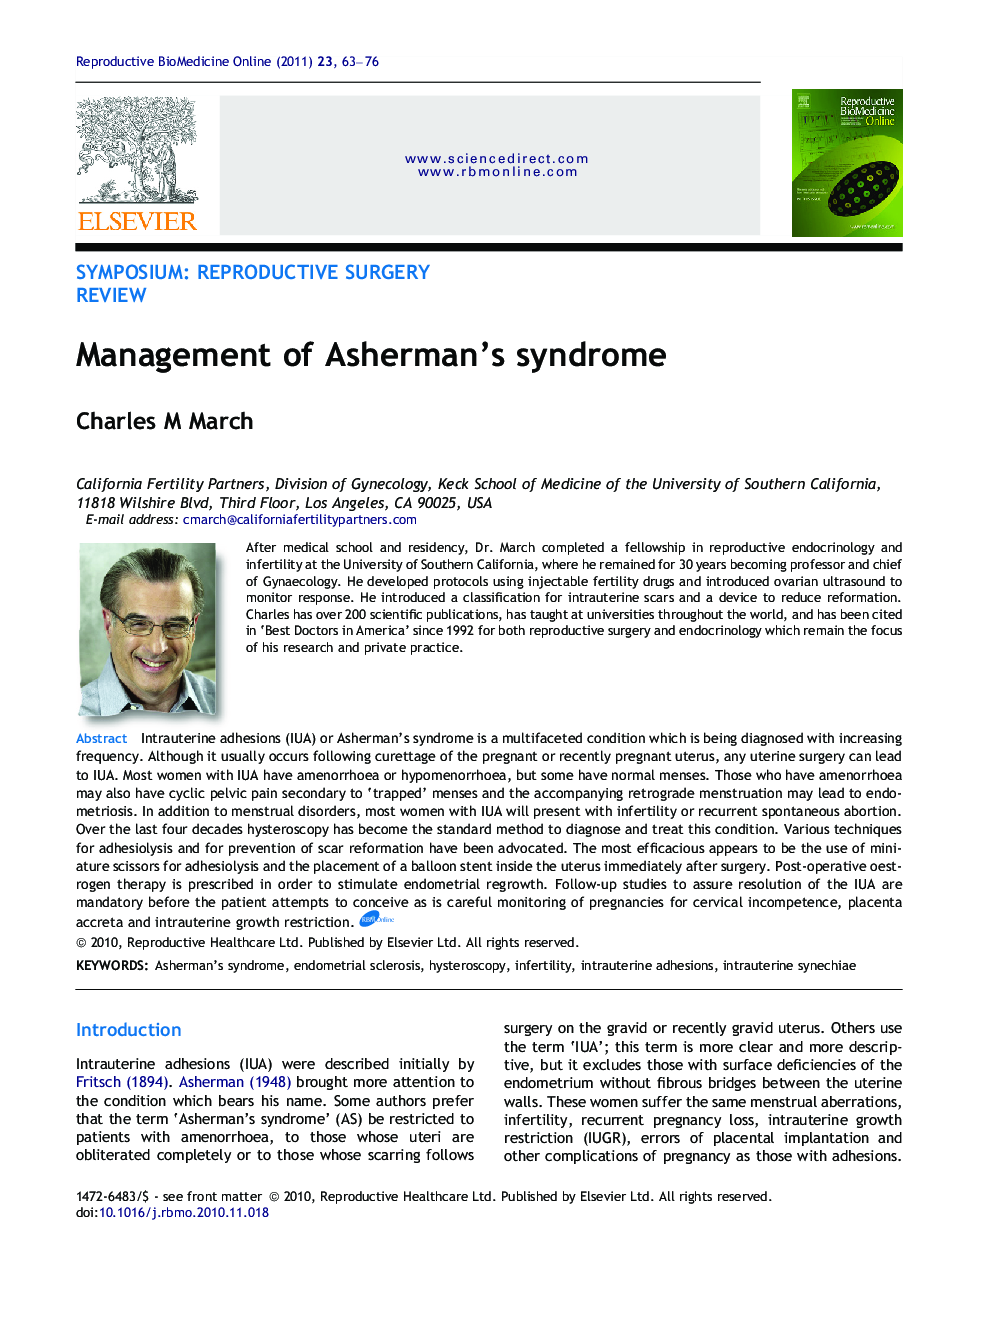 Management of Asherman’s syndrome 